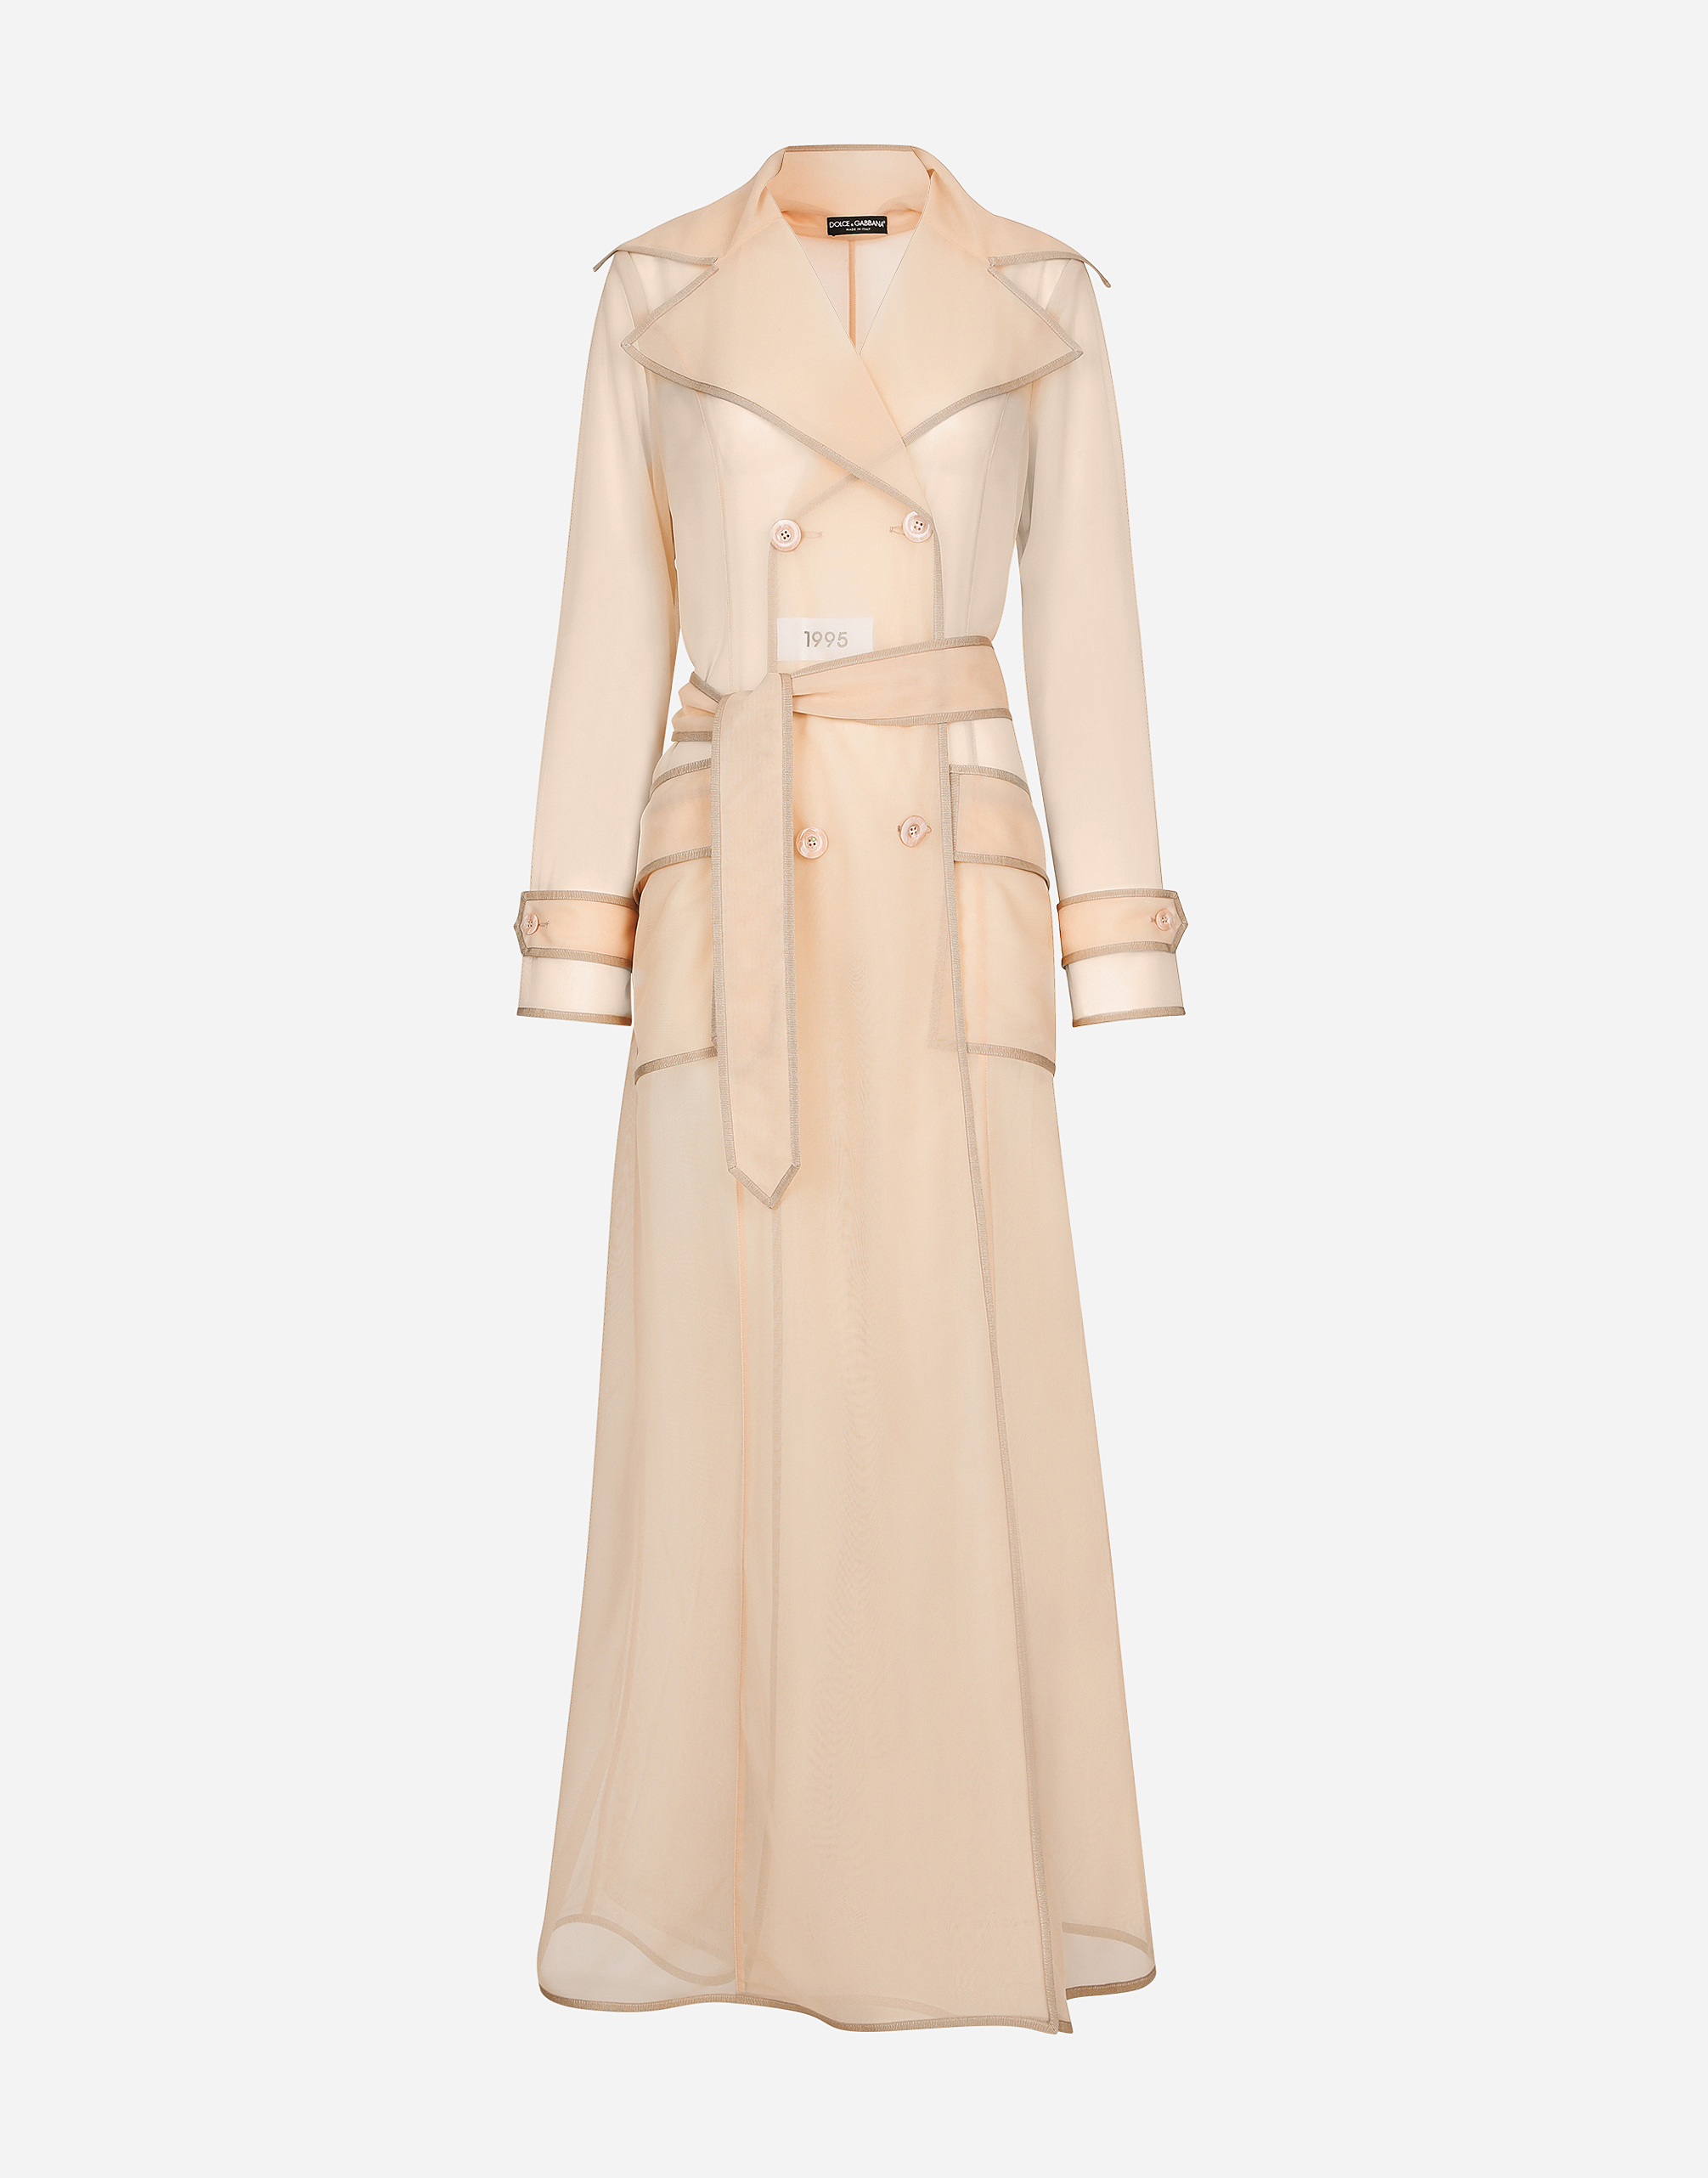 KIM DOLCE&GABBANA Marquisette trench coat with belt in Pale Pink